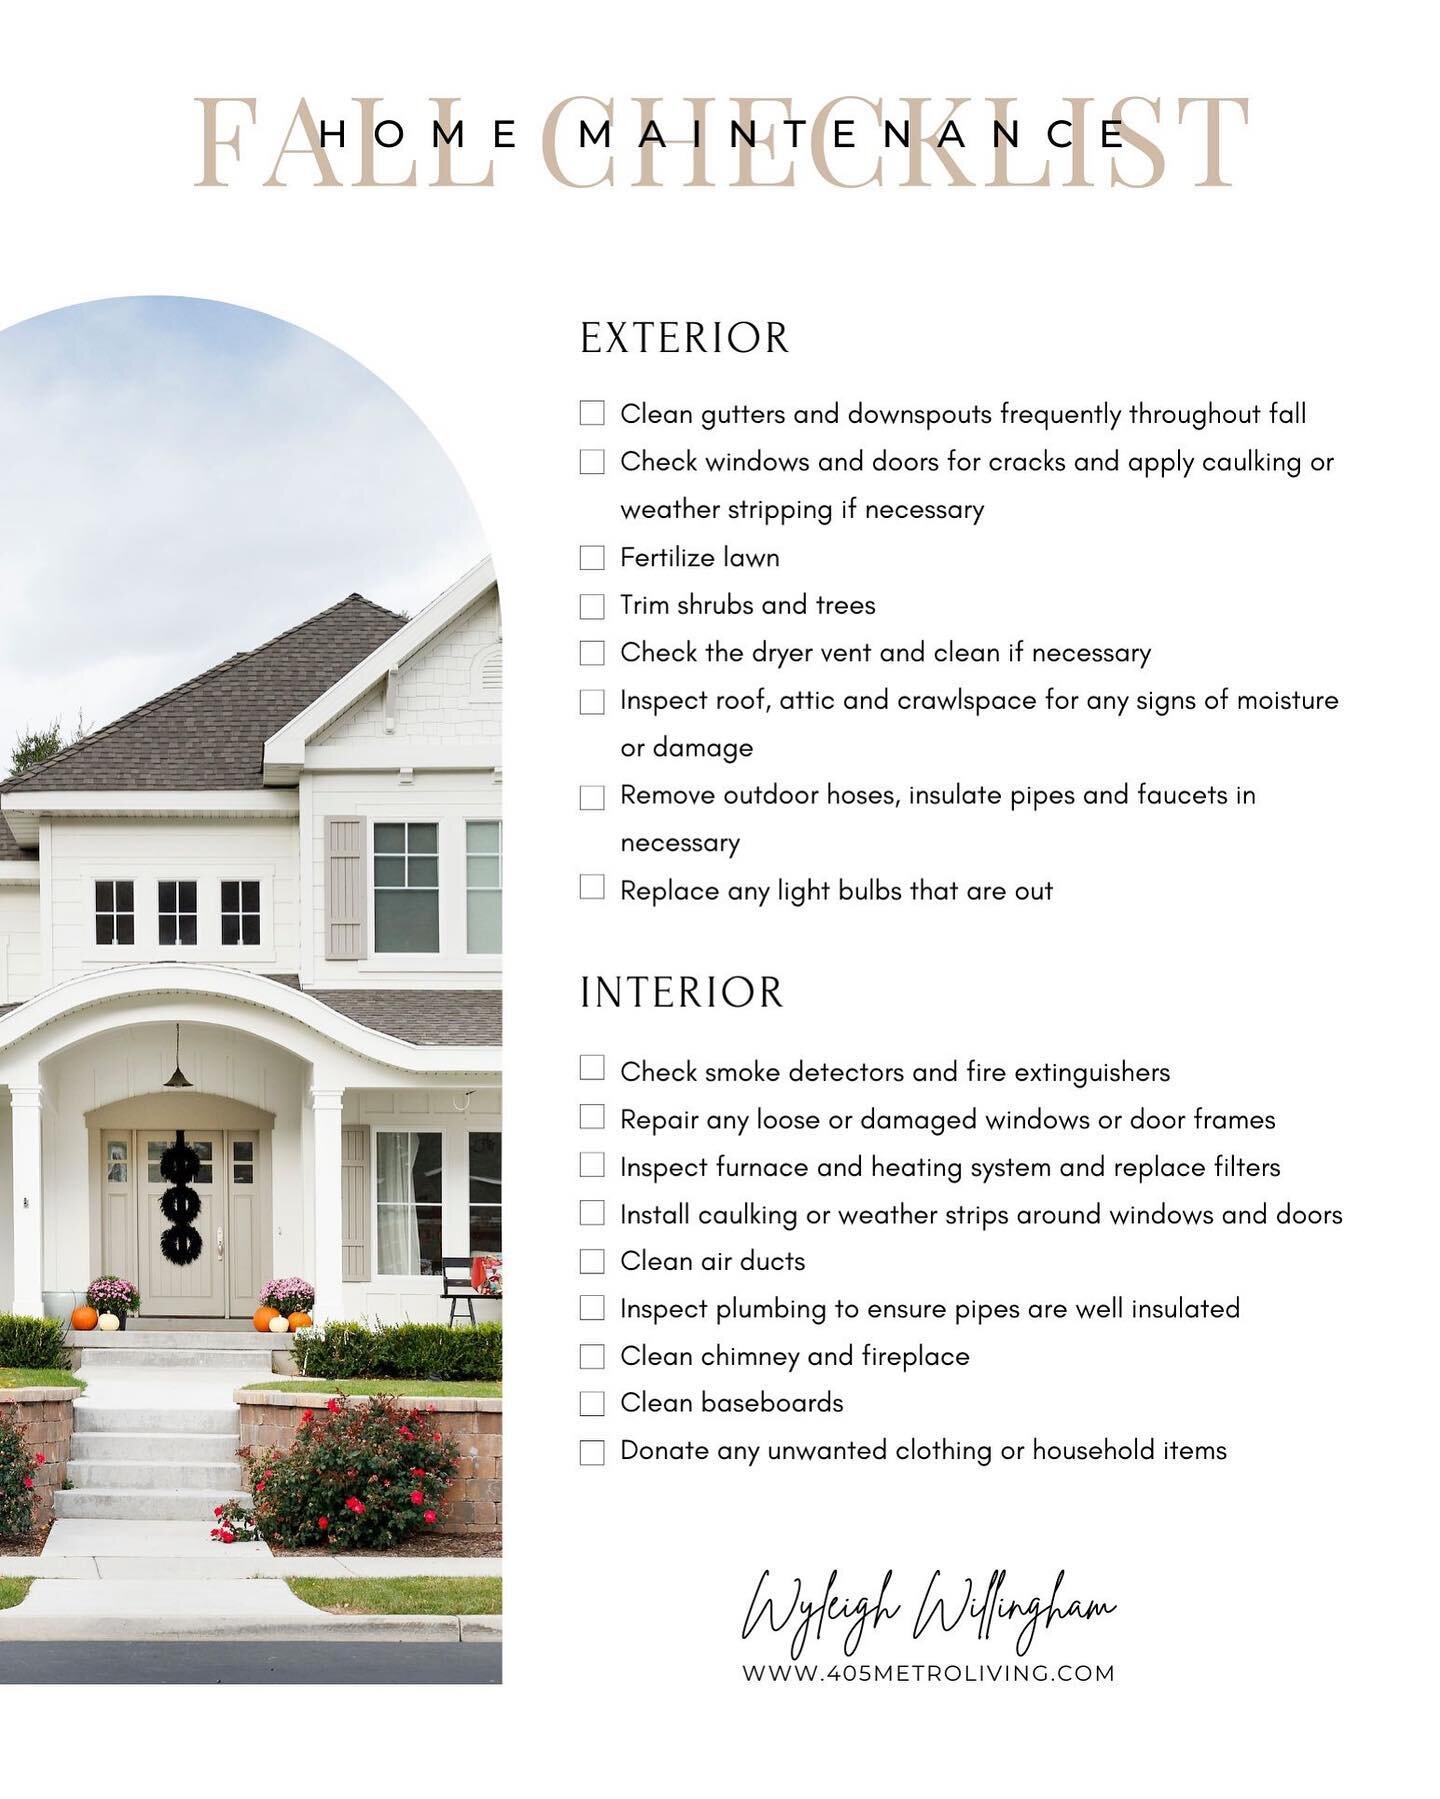 Just a few home maintenance thing for fall to keep your home in tip top shape.  Happy Fall!! 🍁 🍃 🎃🏡

 #happyhome #realtor 
 #happyhome #happyhomeowners #sellinghomes  #soldbywyleigh #405metroliving #okcrealtor #okcrealestate #edmondrealtor #edmon